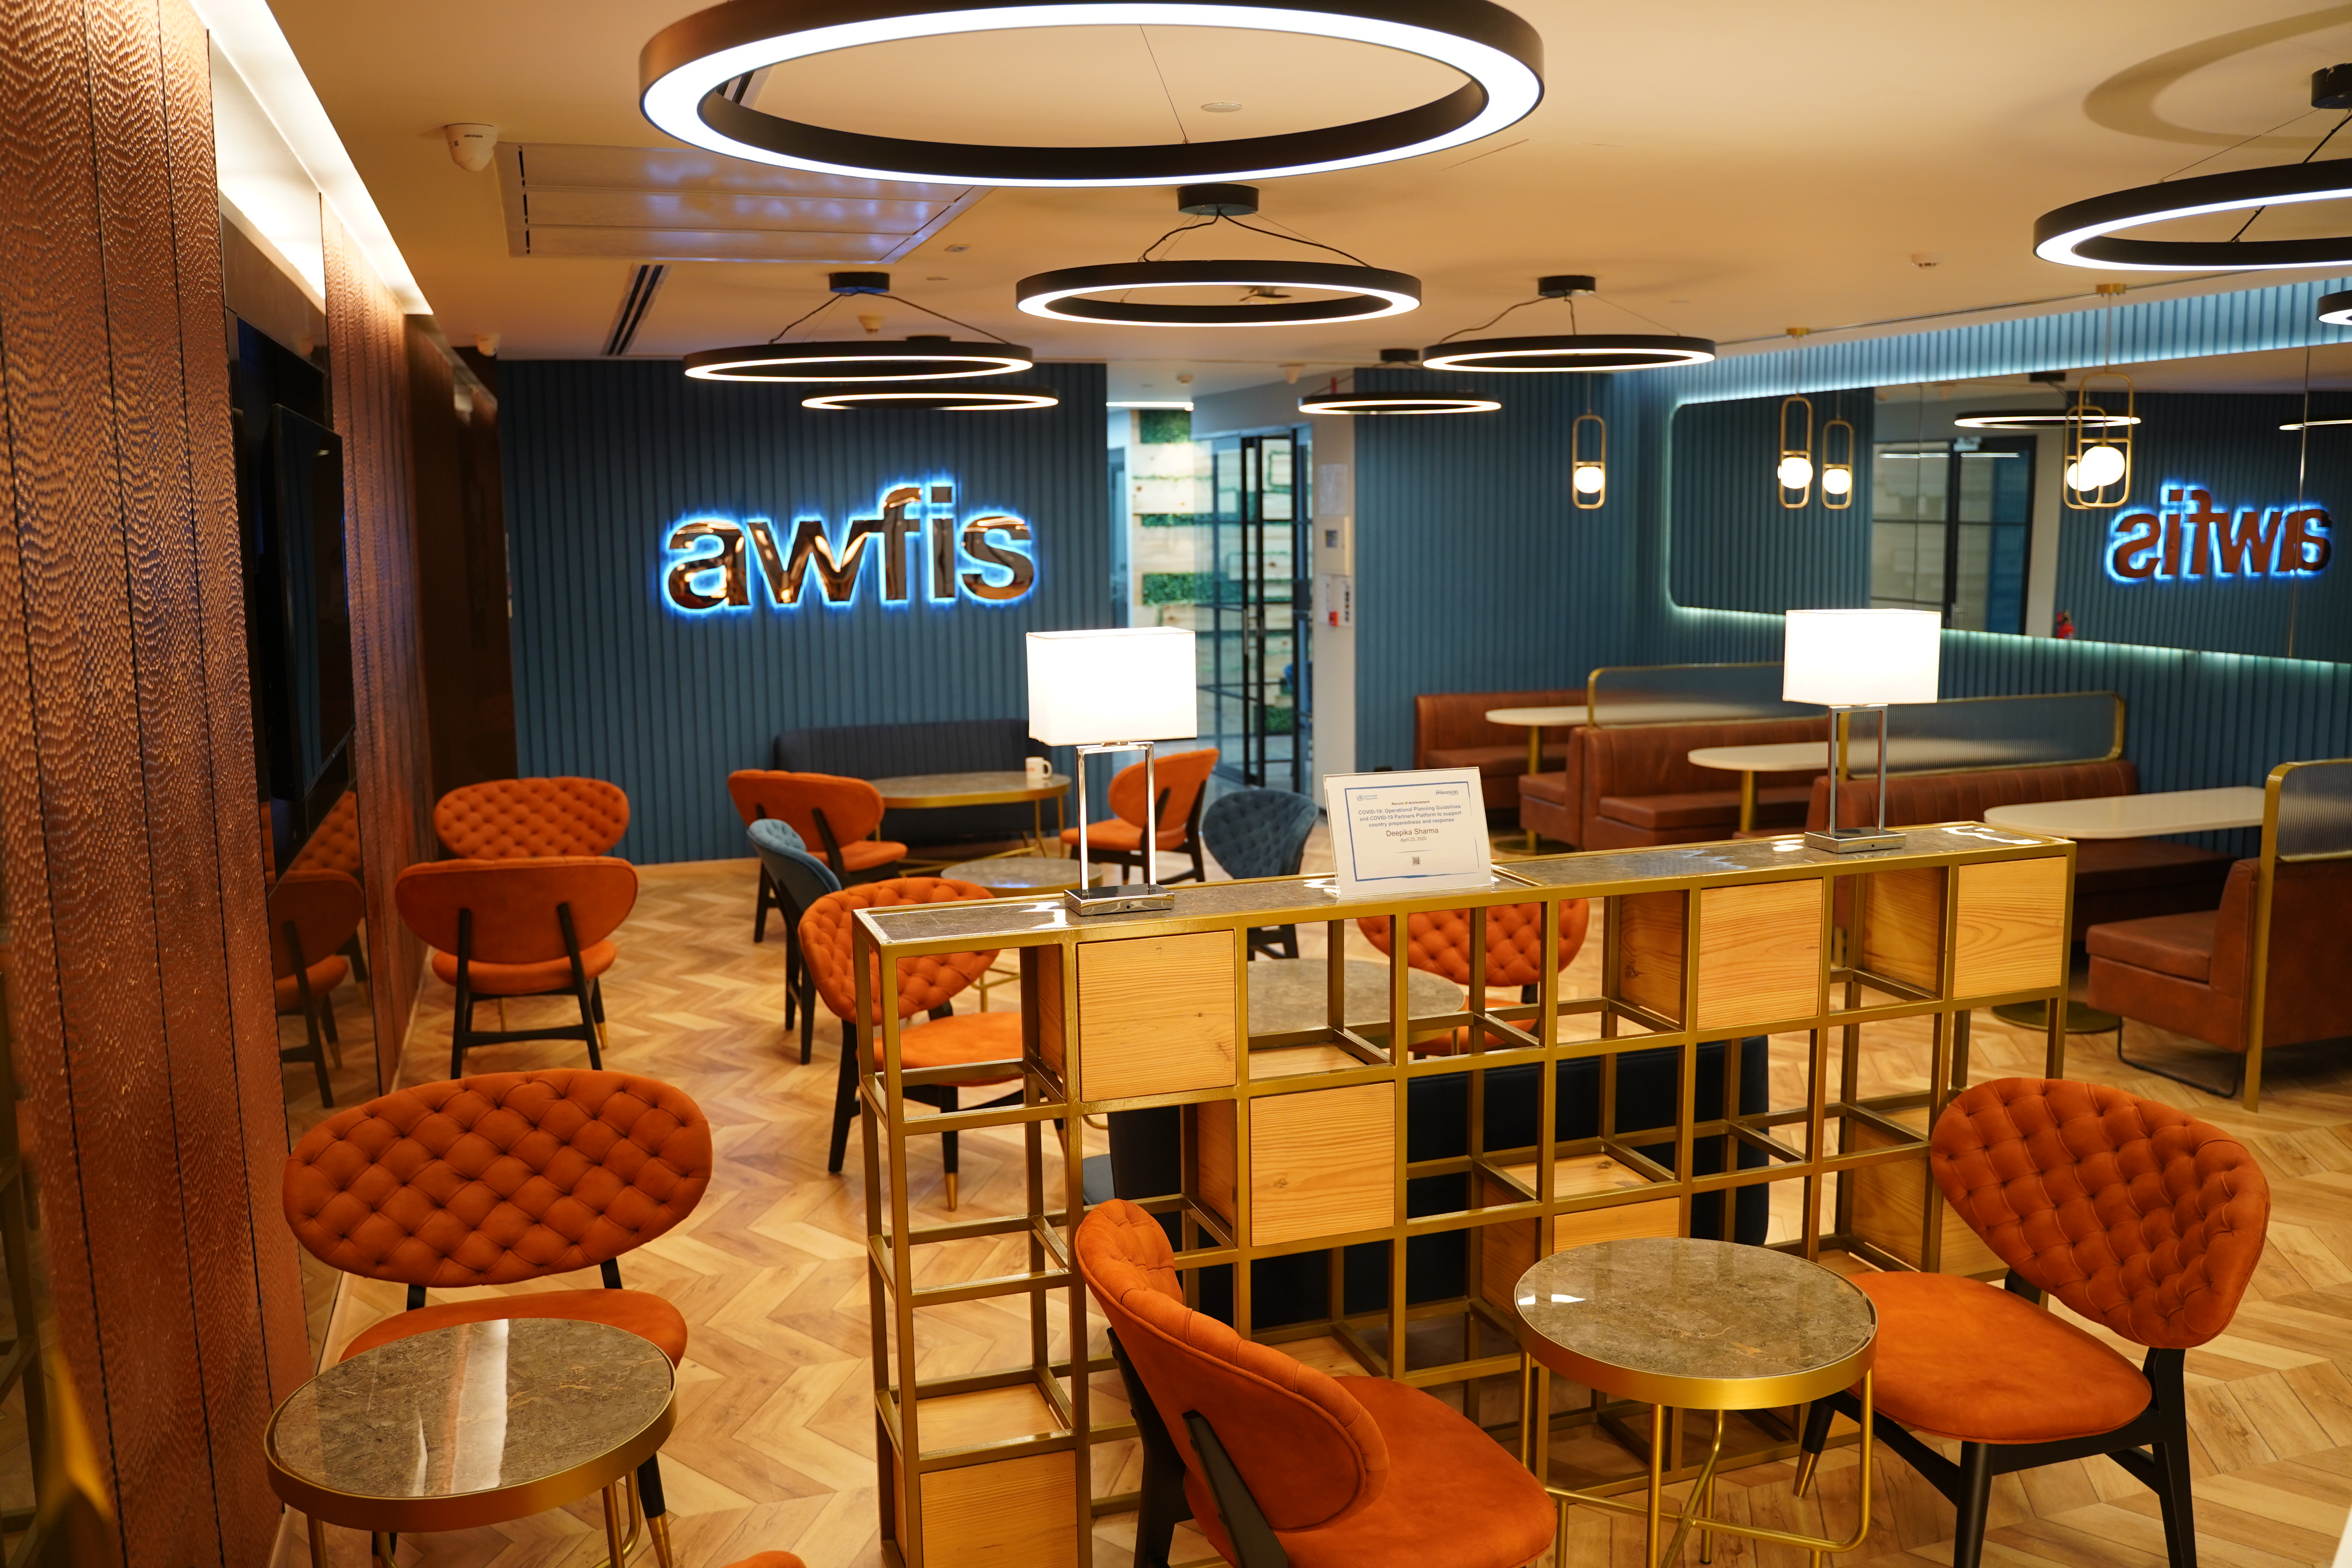 Awfis launches new co-working centre in Kolkata spread over 13,000 sq ft